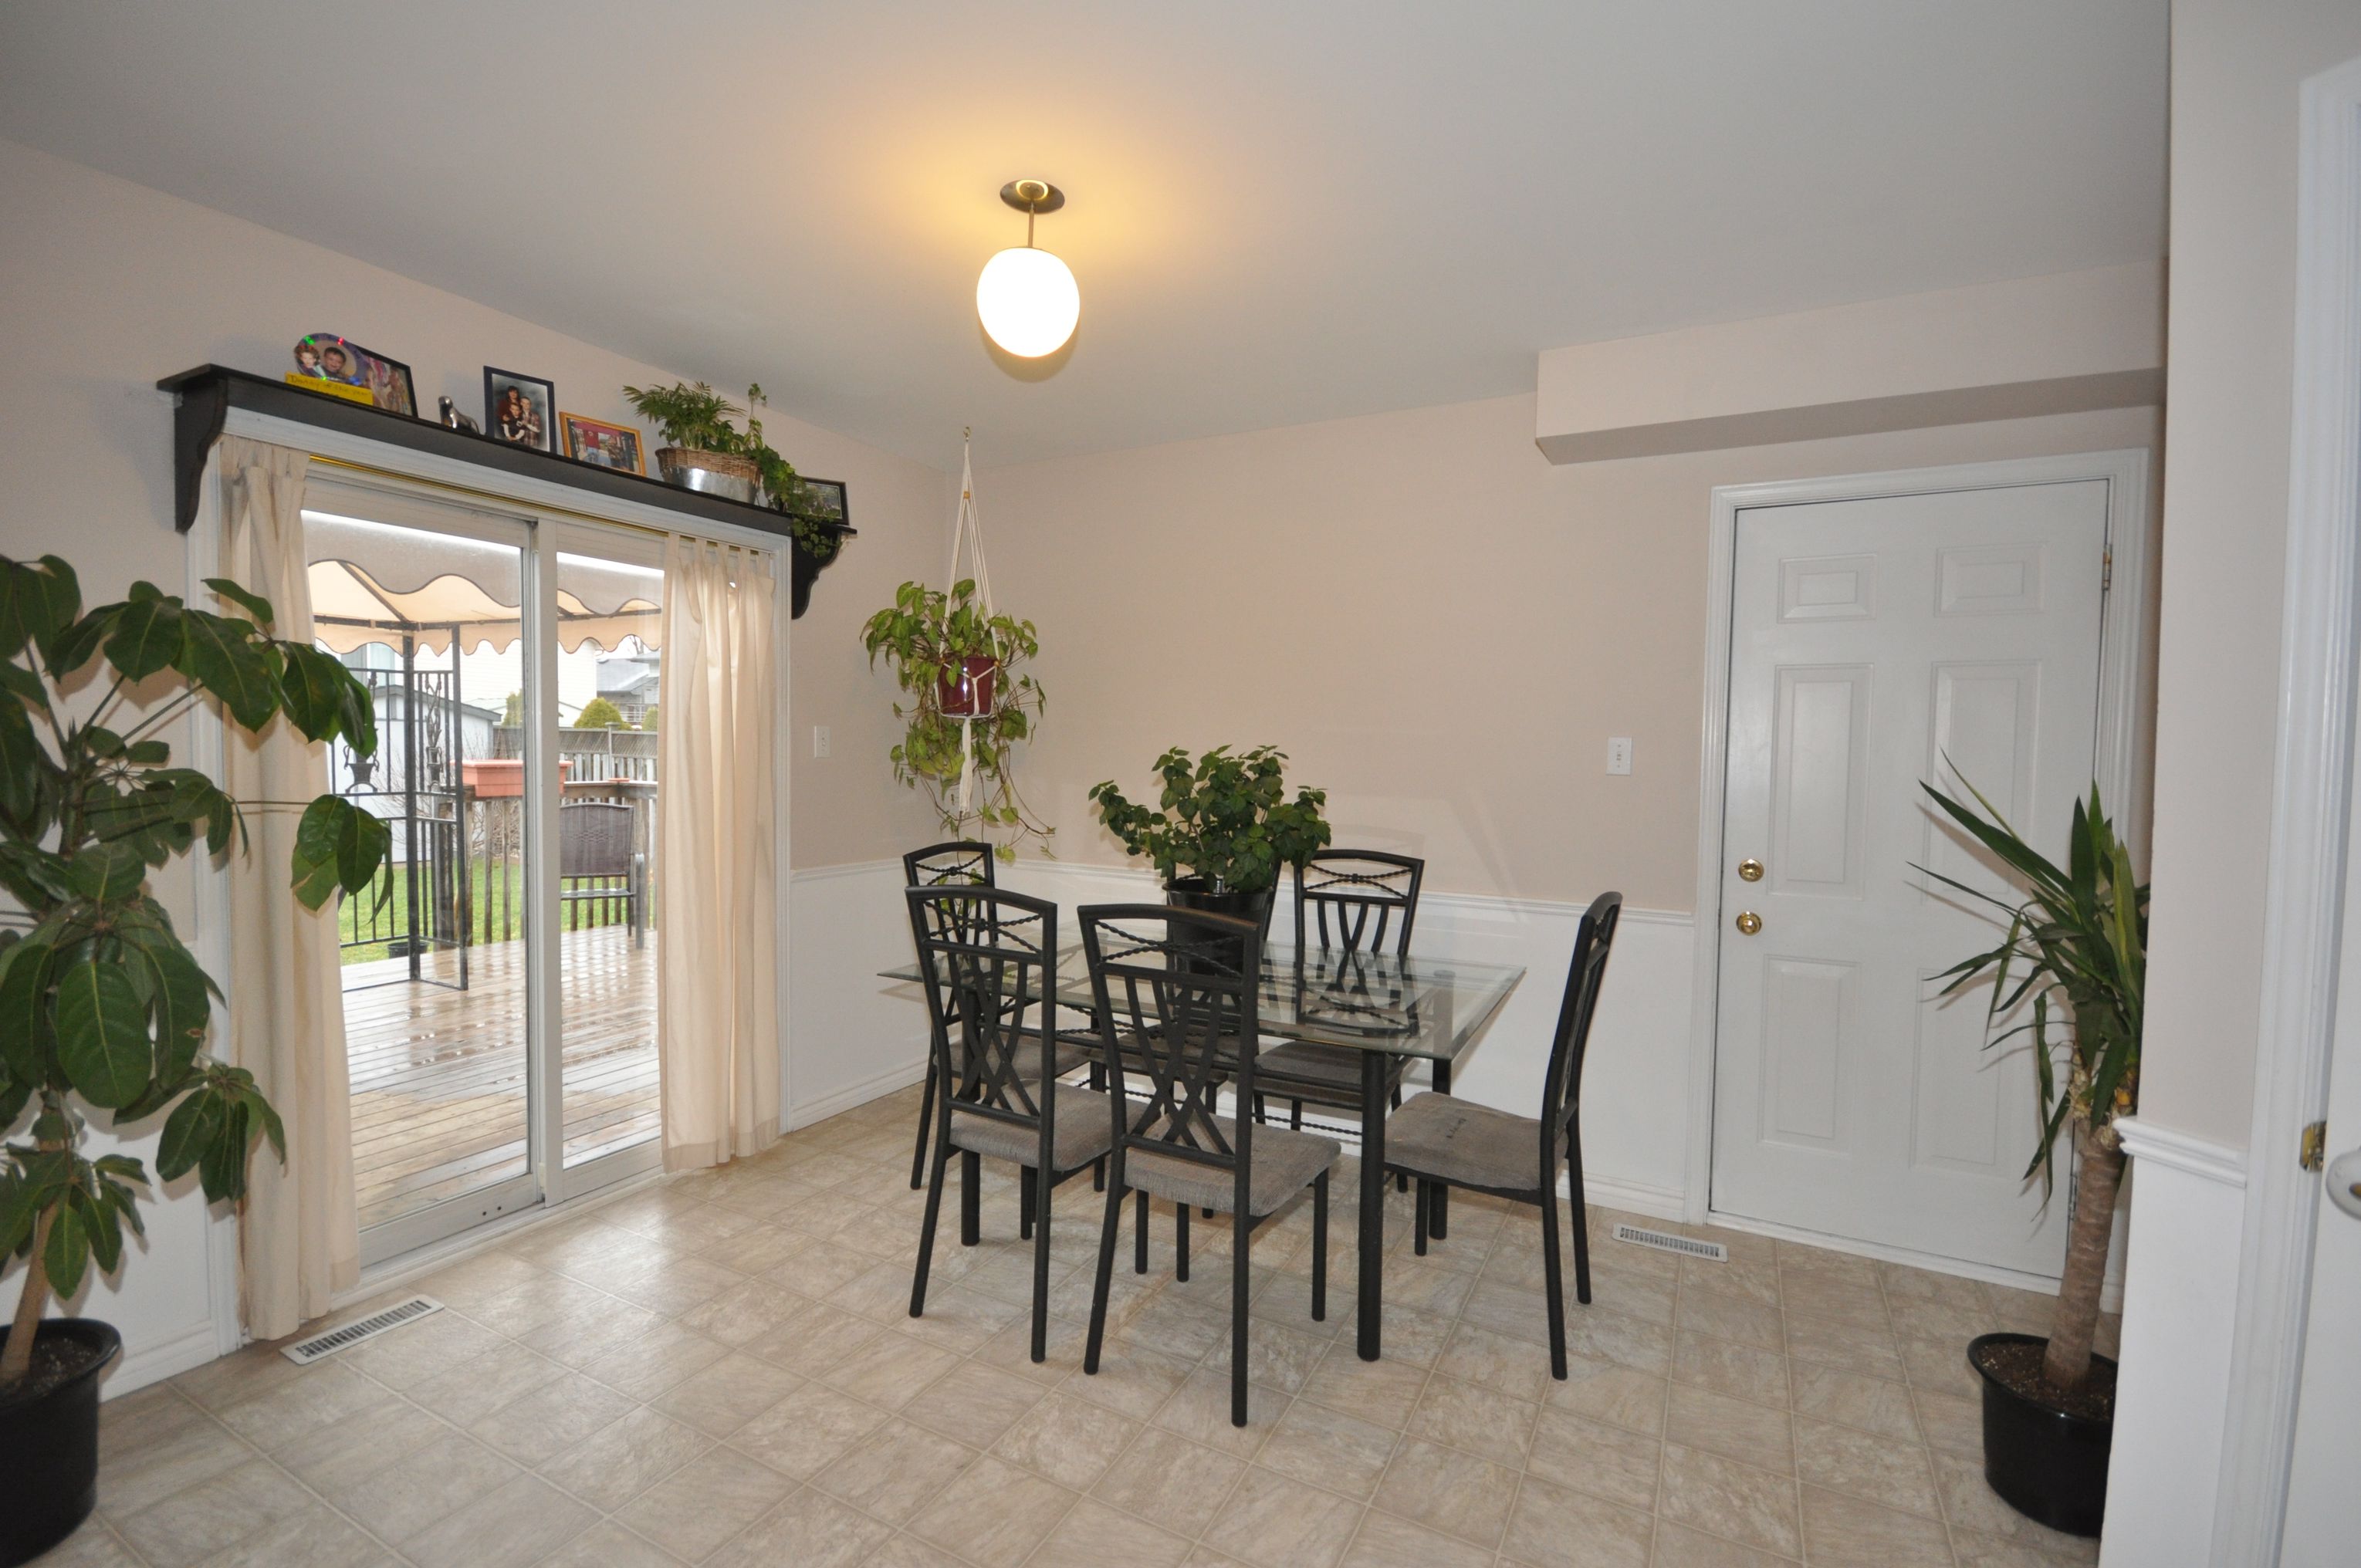 Spacious eating area with patio doors to sundeck